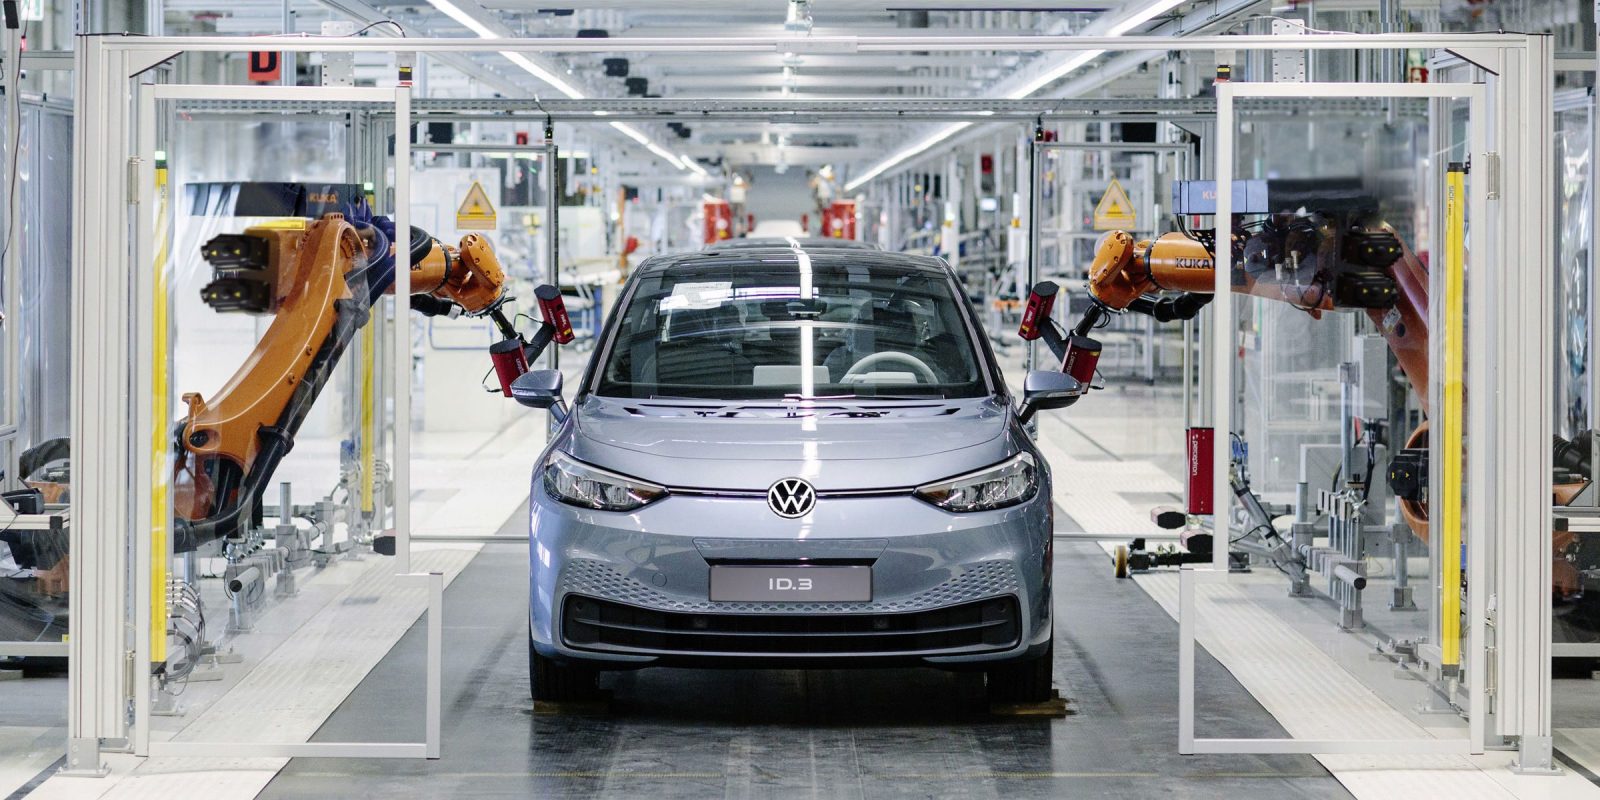 Volkswagen Starts Production Of Electric Car “Obtainable To Millions”